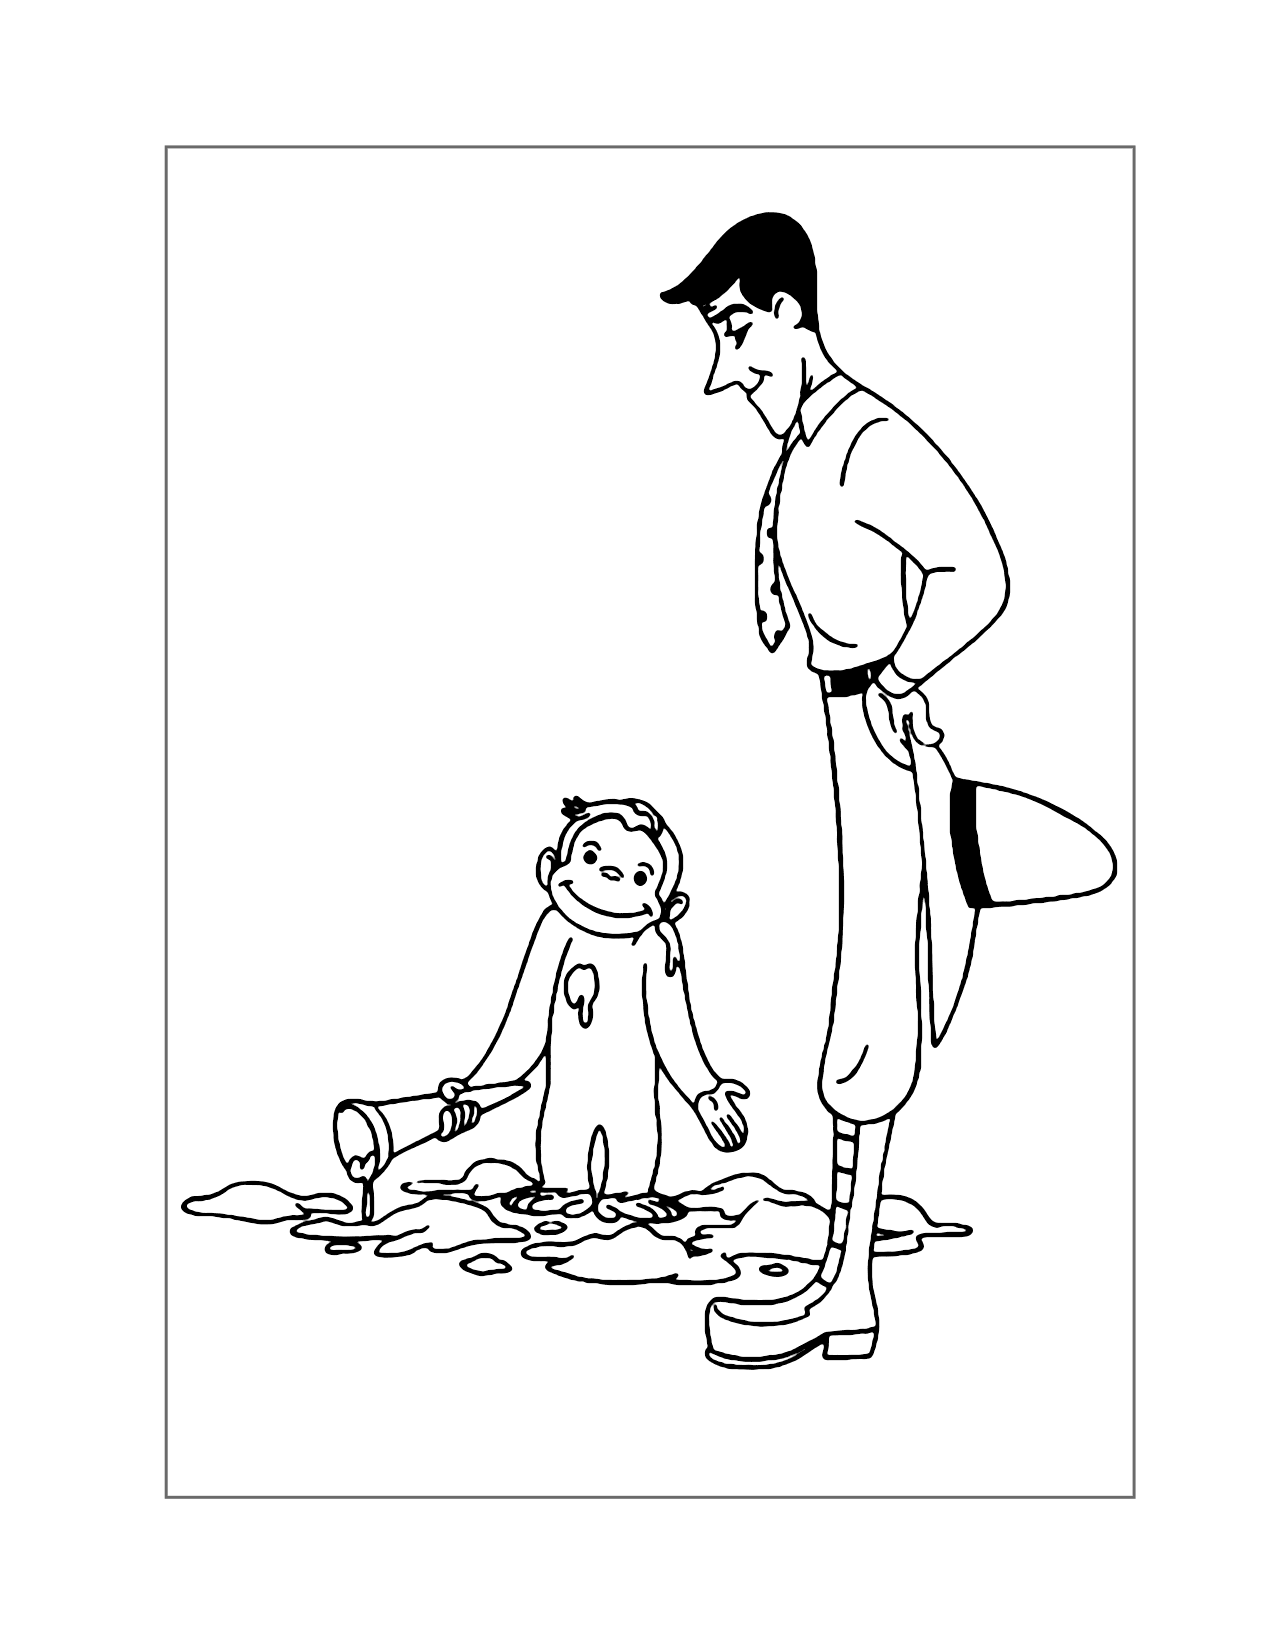 Curious George Made A Mess Coloring Page